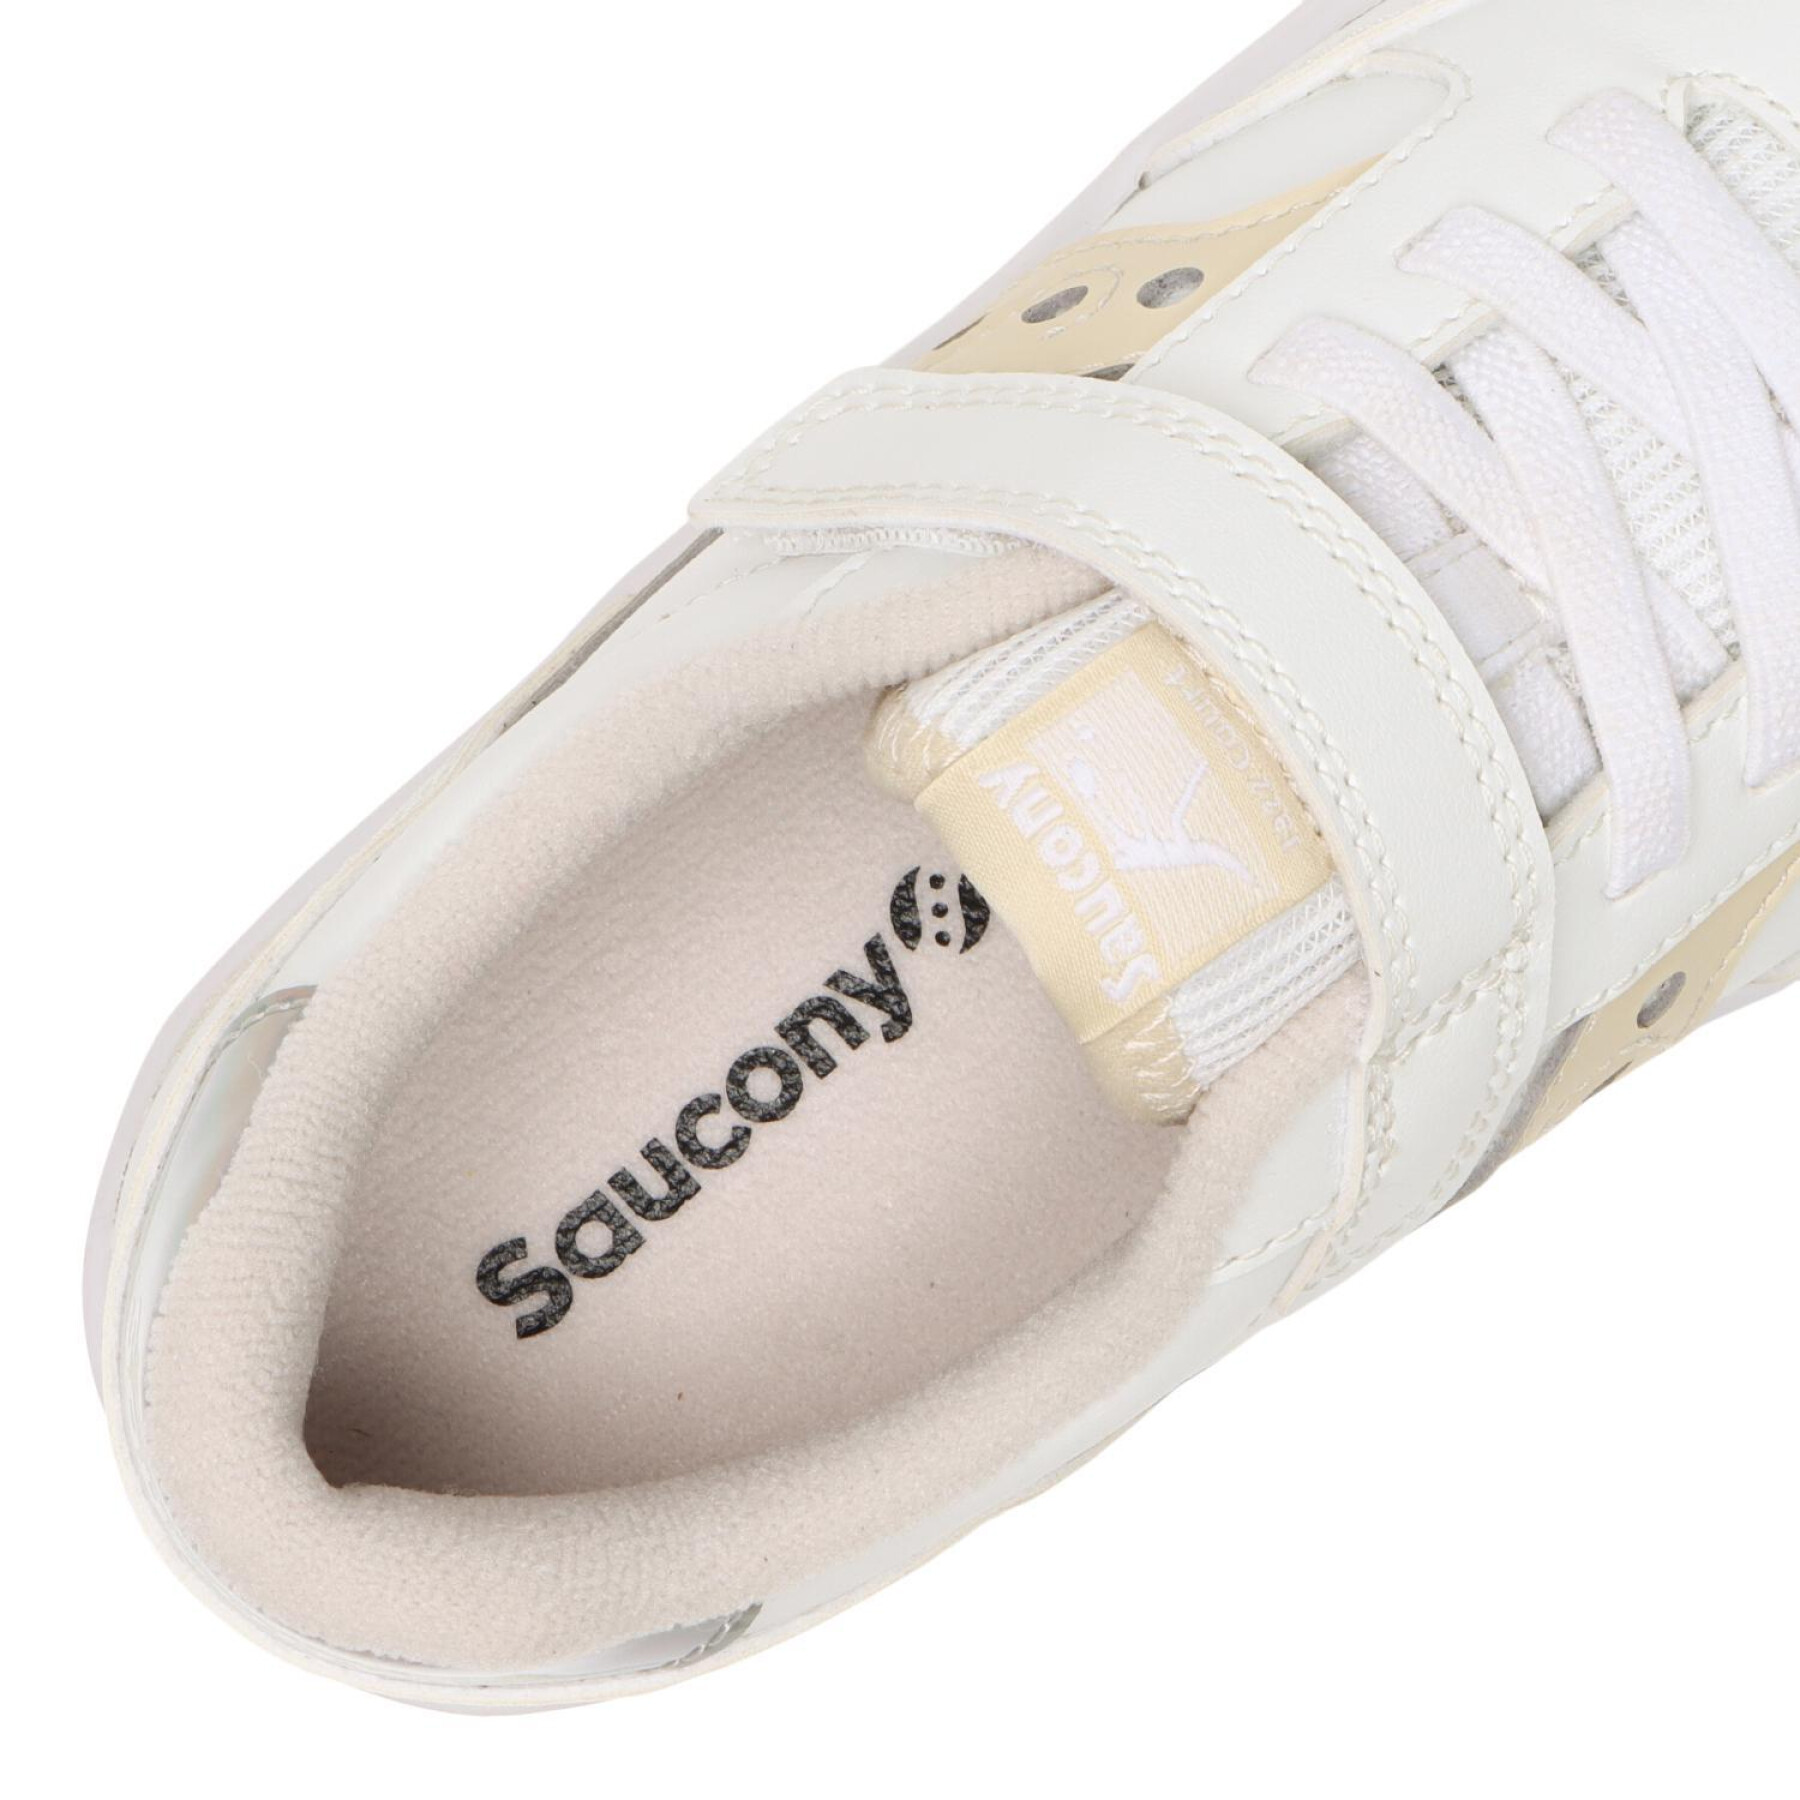 Girl sneakers Saucony Jazz Court A